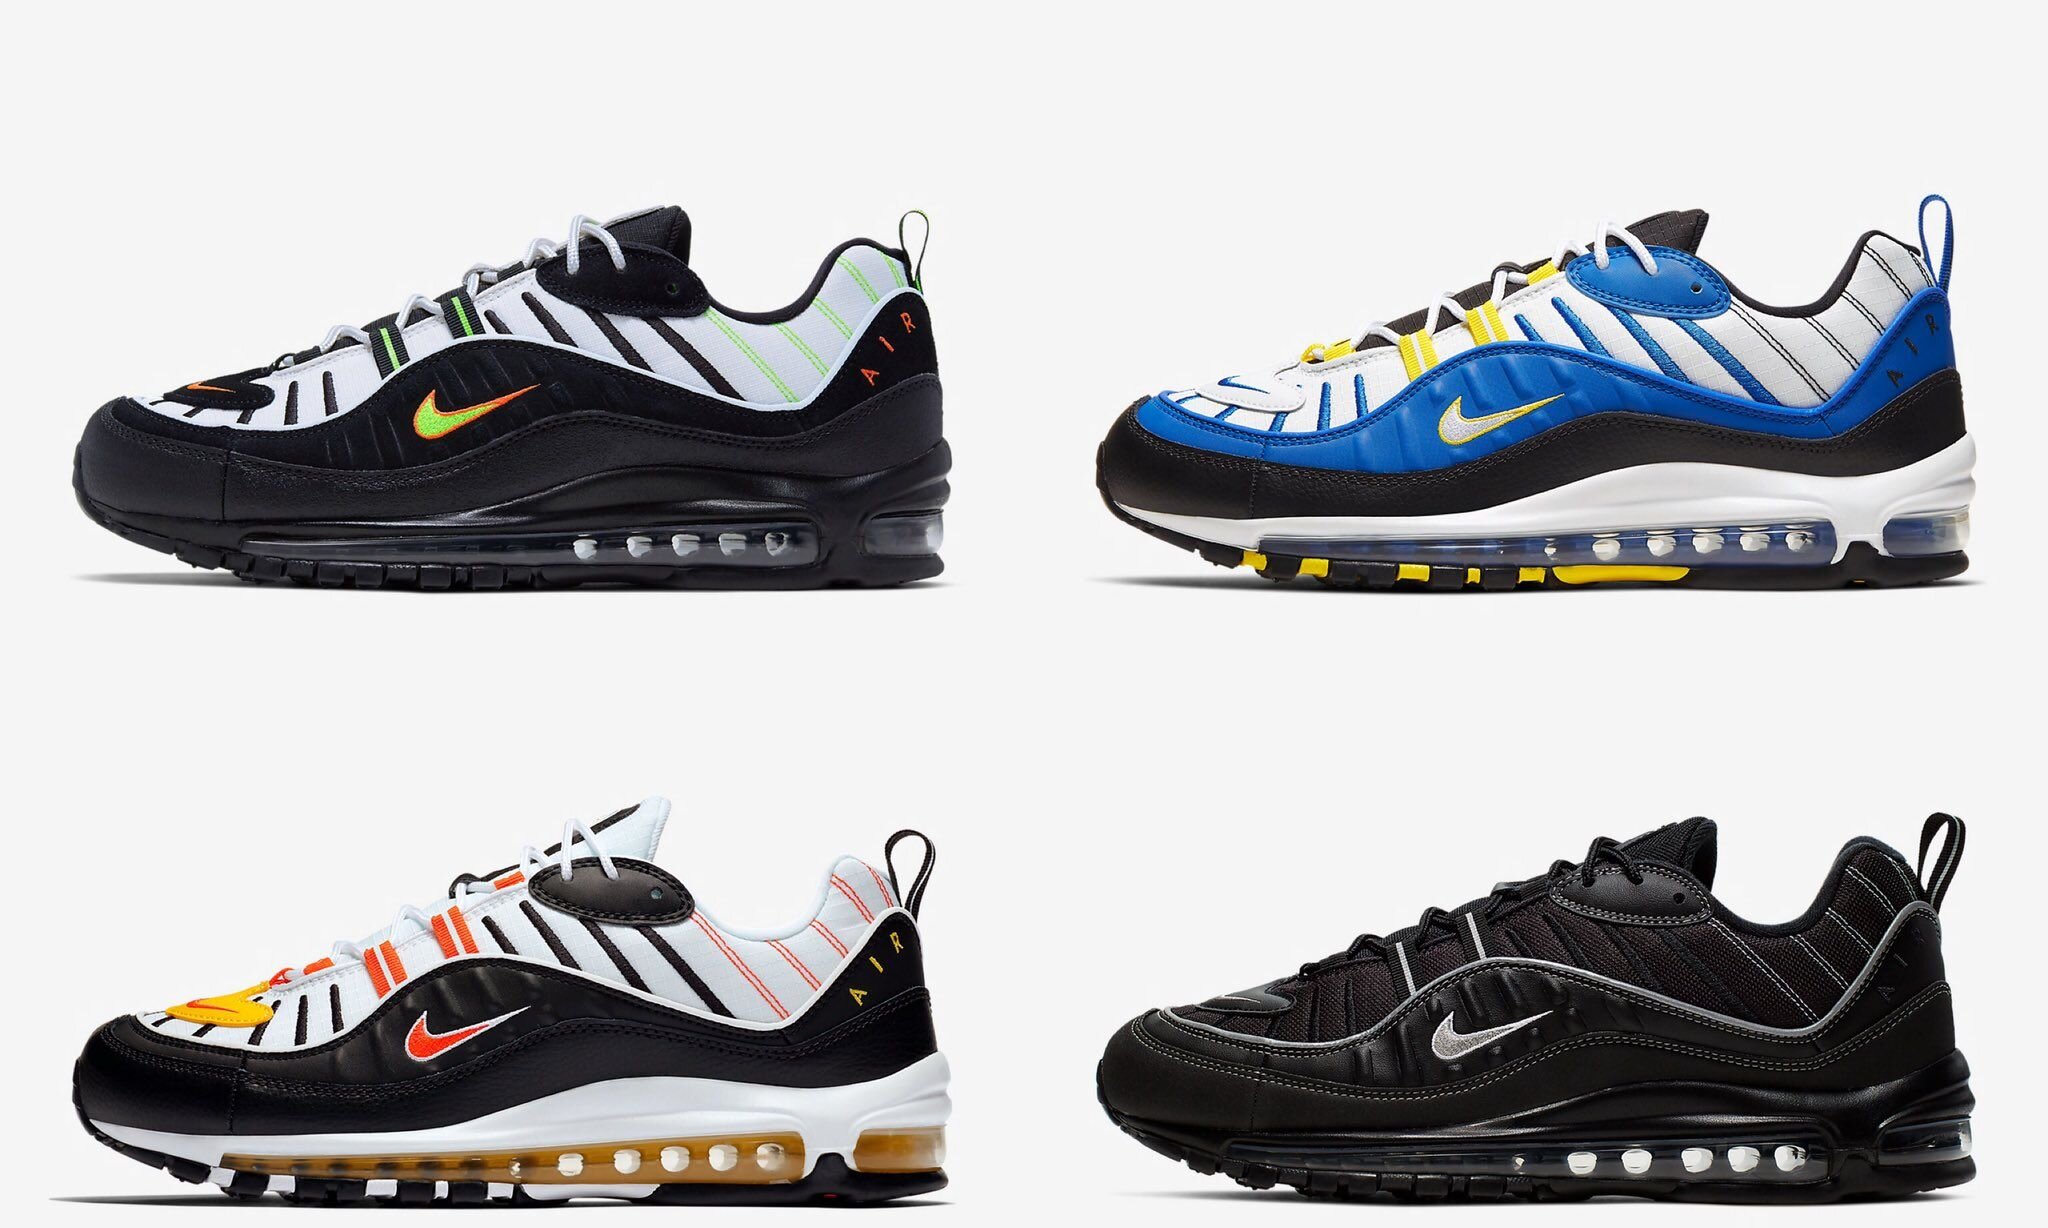 The Nike Air Max 98 Are On Sale For $86 Shipped! — Kicks Under Cost